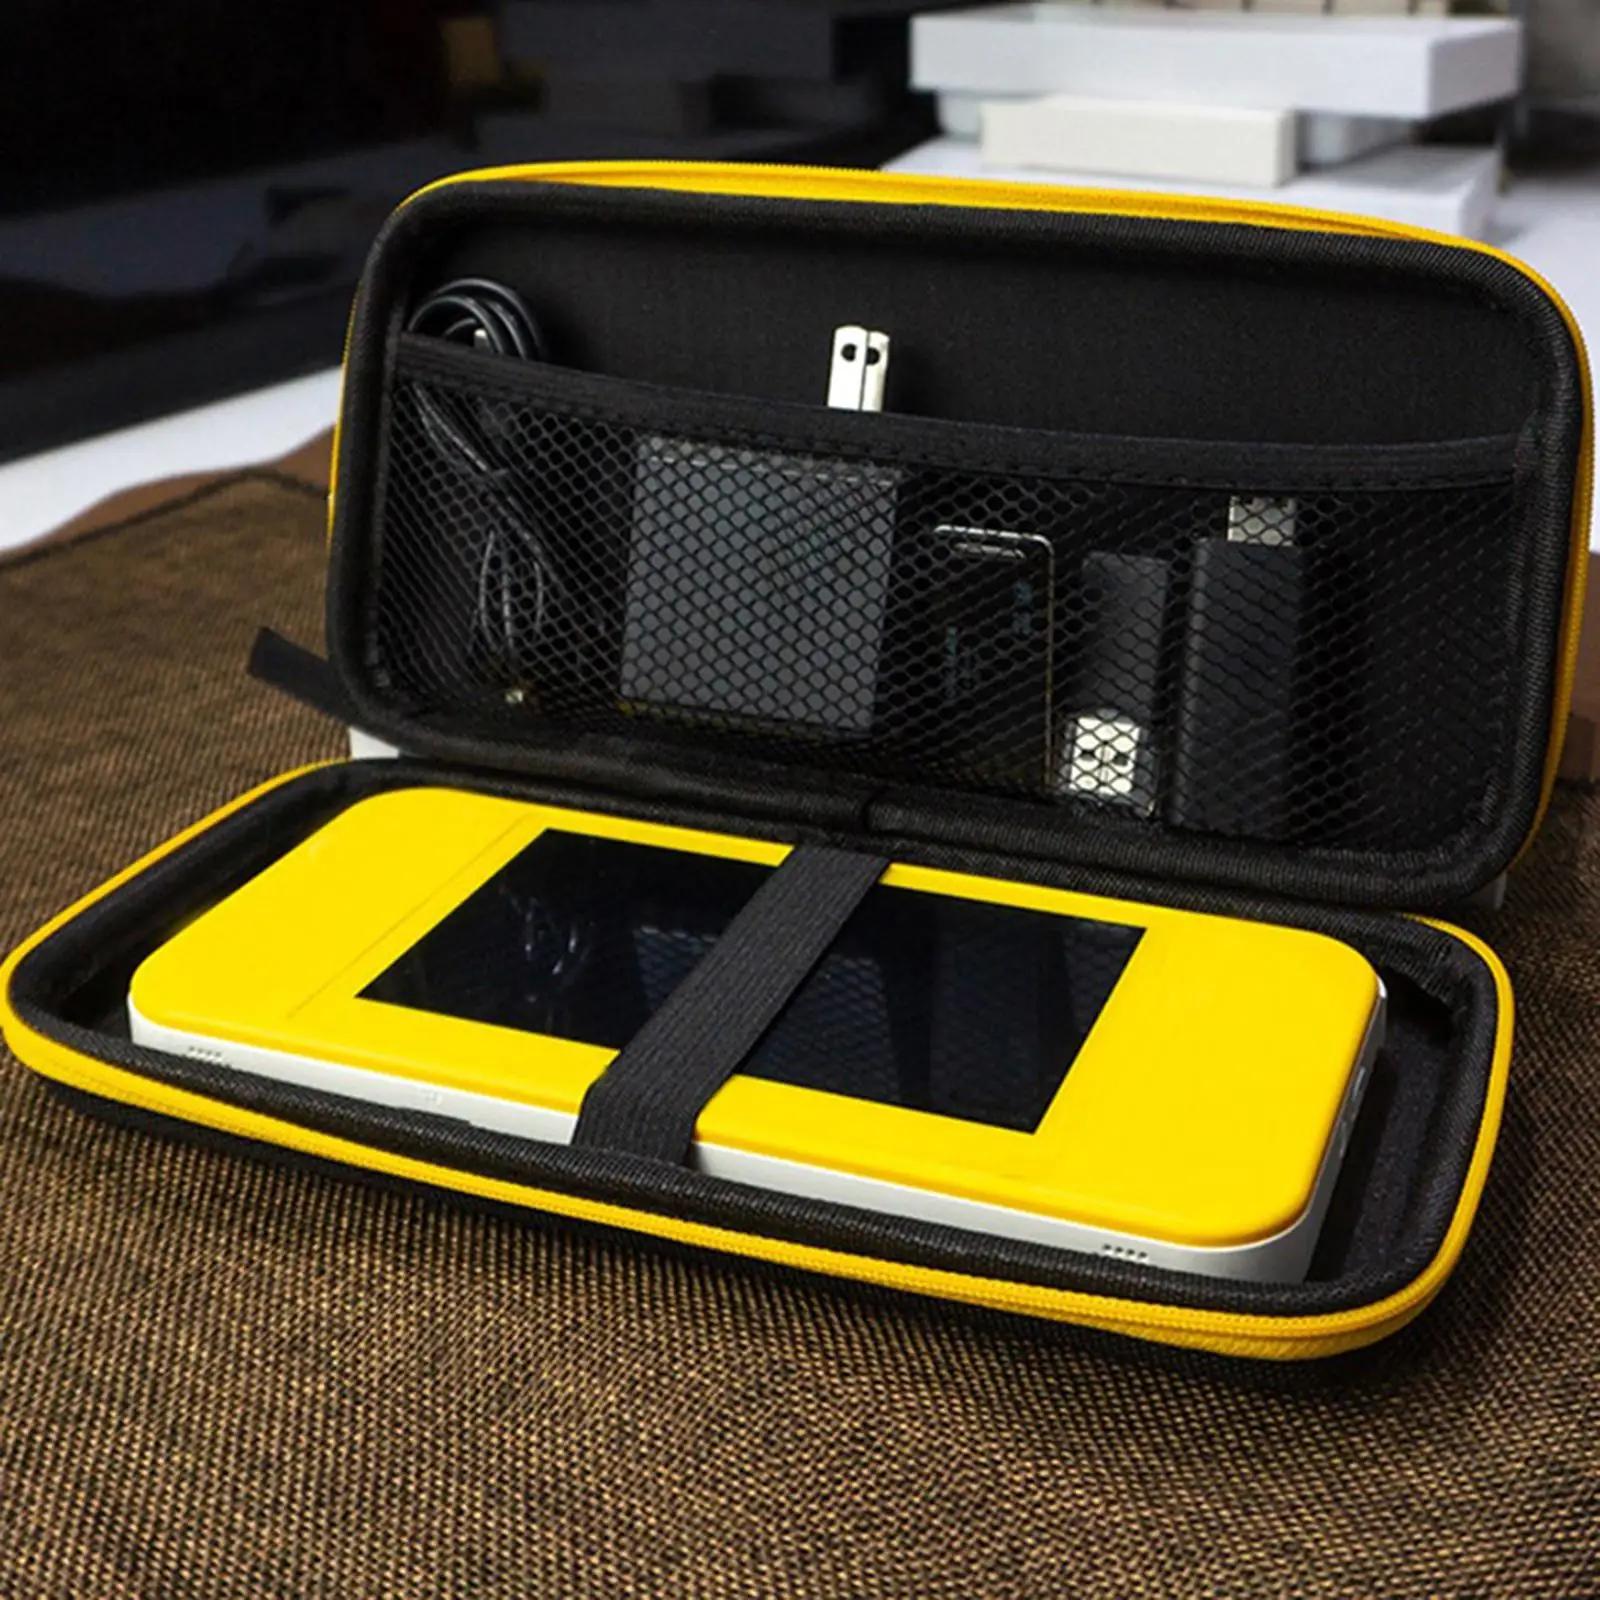 Carrying Case Hard Protective Organizer Case Screen Protect Travel Impact Resistant Accessories Portable Hard Shell for Pocket 3